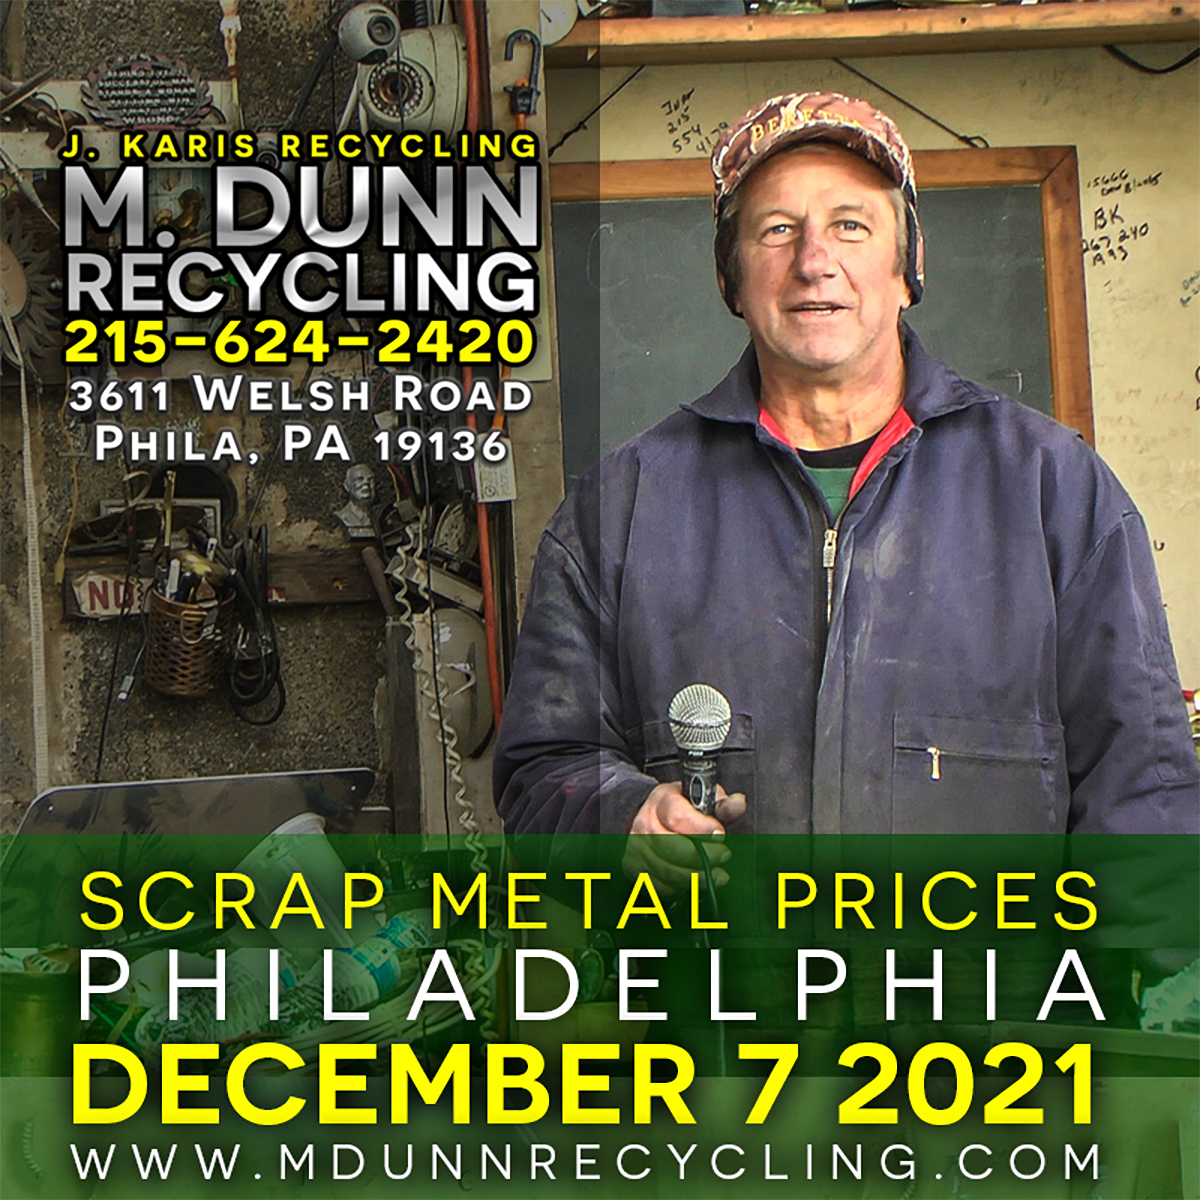 Scrapping Aluminum Philadelphia & New Jersey January 12, 2022. This week we scrap different grades of Aluminum: Aluminum Siding, Aluminum Cans, Aluminum A-Frame Radiator, an Aluminum Table and Aluminum Shower Stall. Make extra money bringing in scrap metal such as Aluminum Siding, Aluminum Car parts, Aluminum Cans, Brass, Copper, Lead Batteries, Aluminum Wheels, Romex Wire, Copper Extension Cords and more